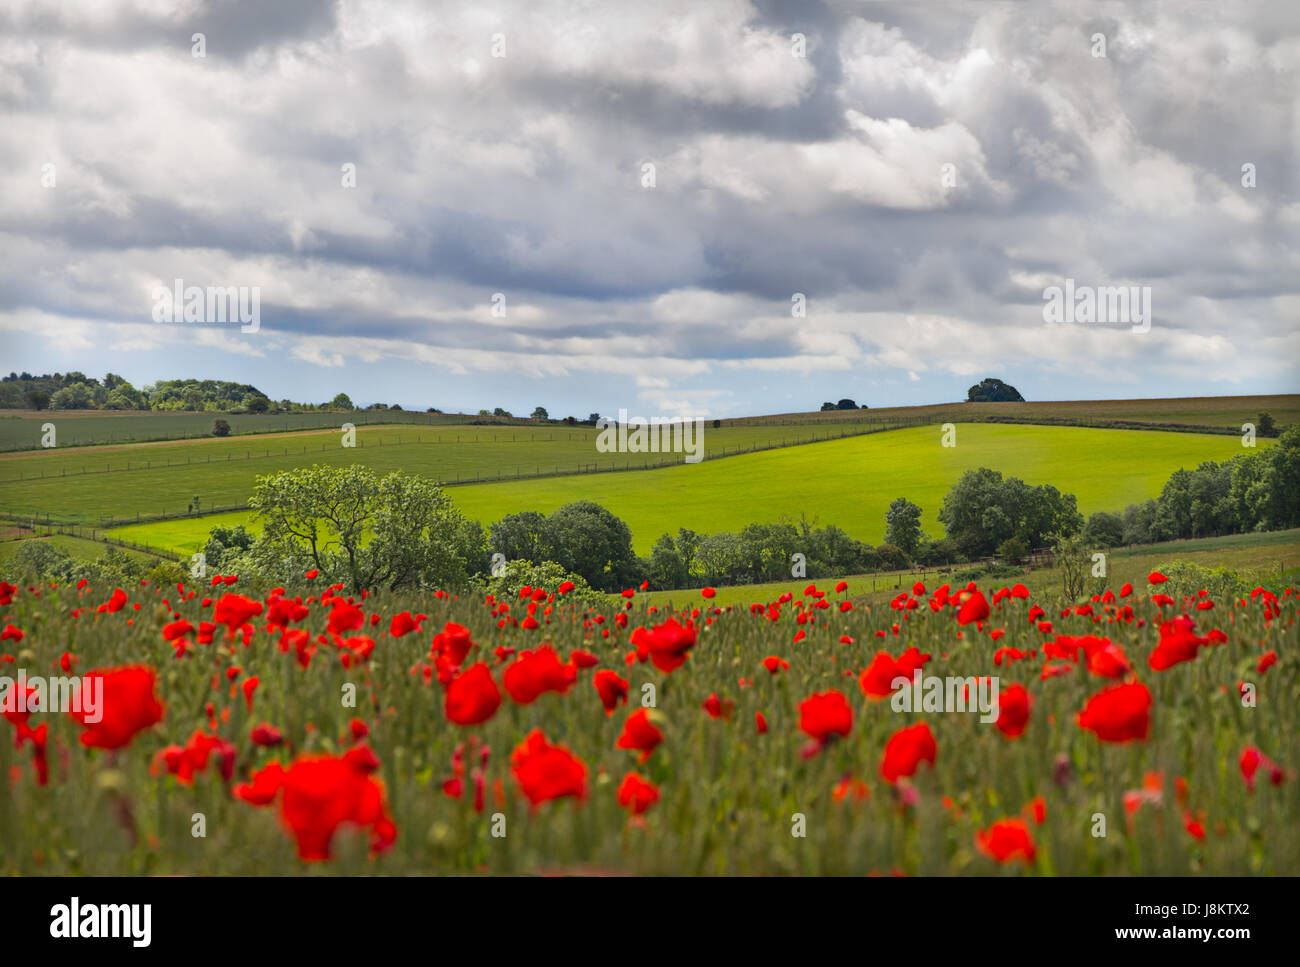 agriculture, farming, flower, flowers, plant, poppy, farmland, clouds, tree, Stock Photo